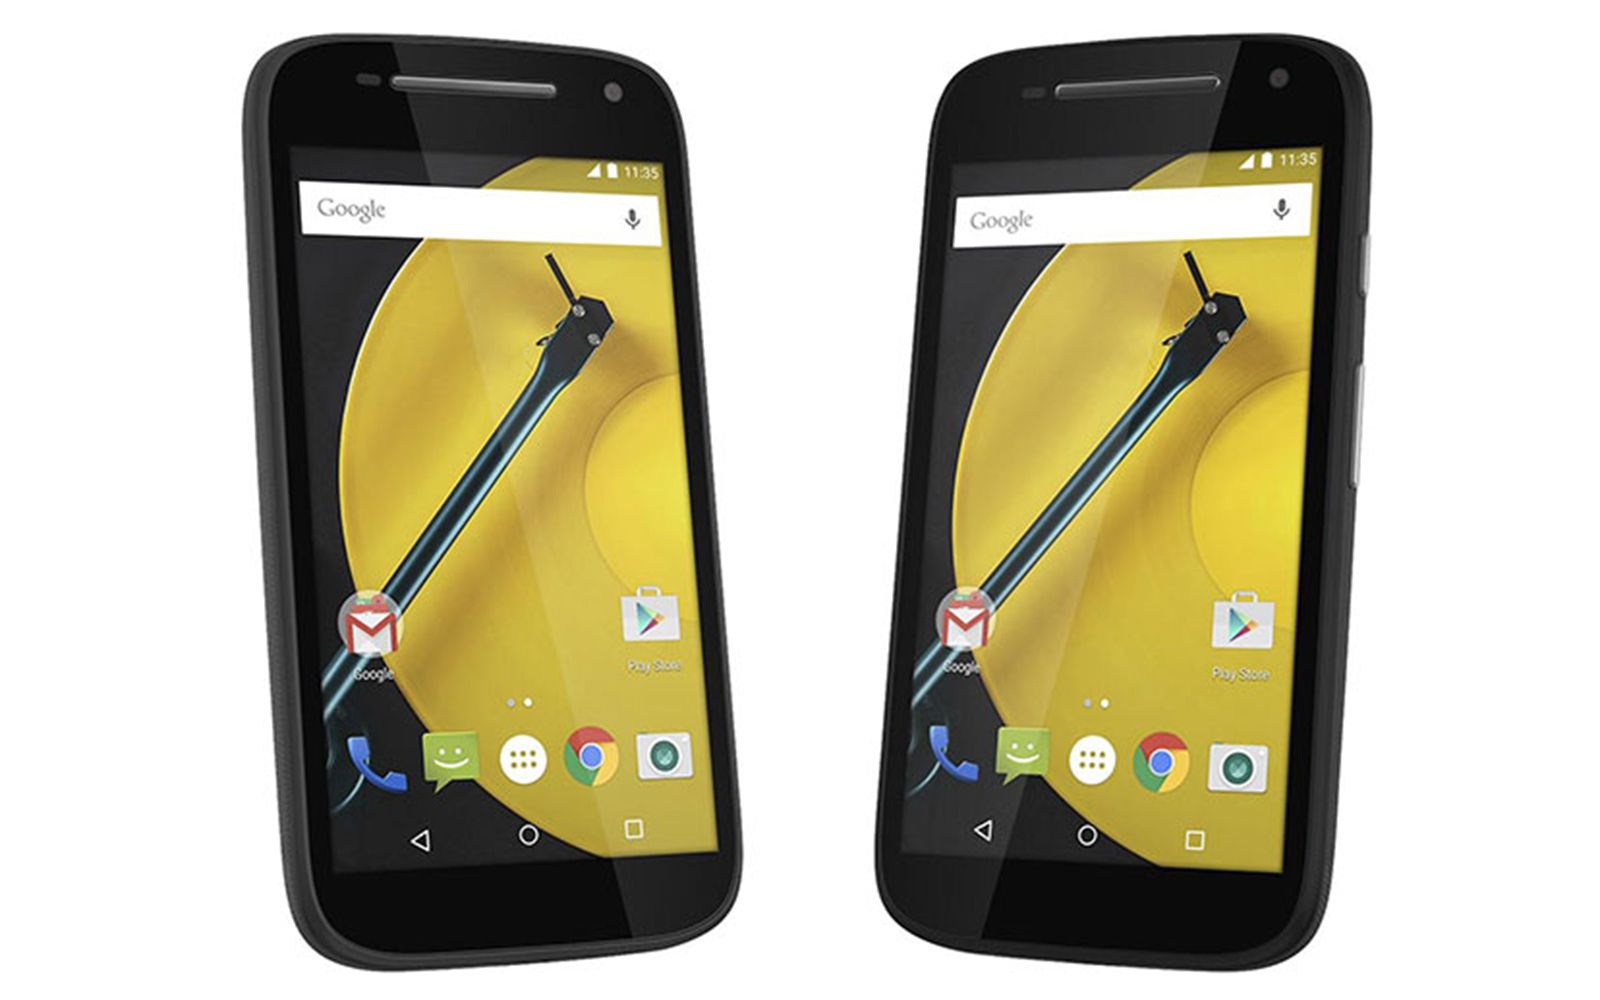 motorola moto e second generation smartphone appears sporting upgrades including 4g image 1